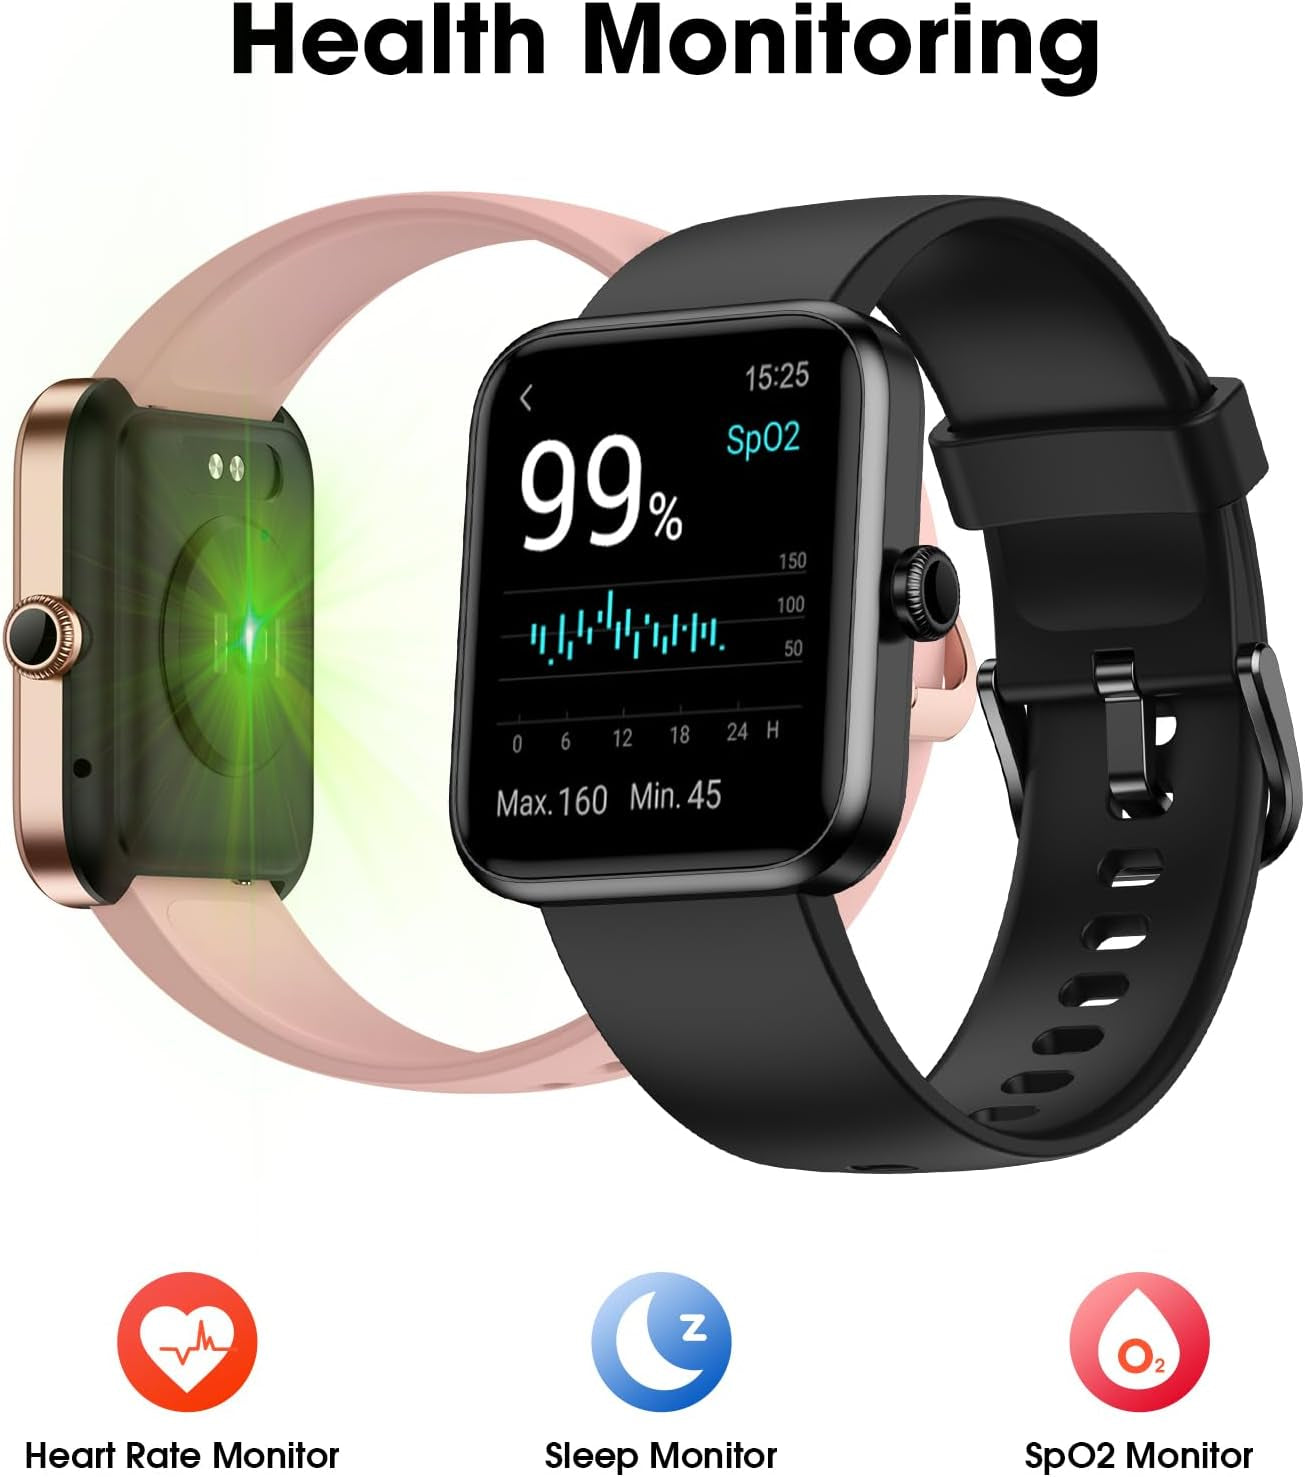 Smart Watch for Women Men, Fitness Tracker Watch with Heart Rate Monitor, Sleep, SpO2 Tracker, 5ATM Waterproof Smartwatch Sports Watch Compatible with Android iOS Phones Step Calories Counter